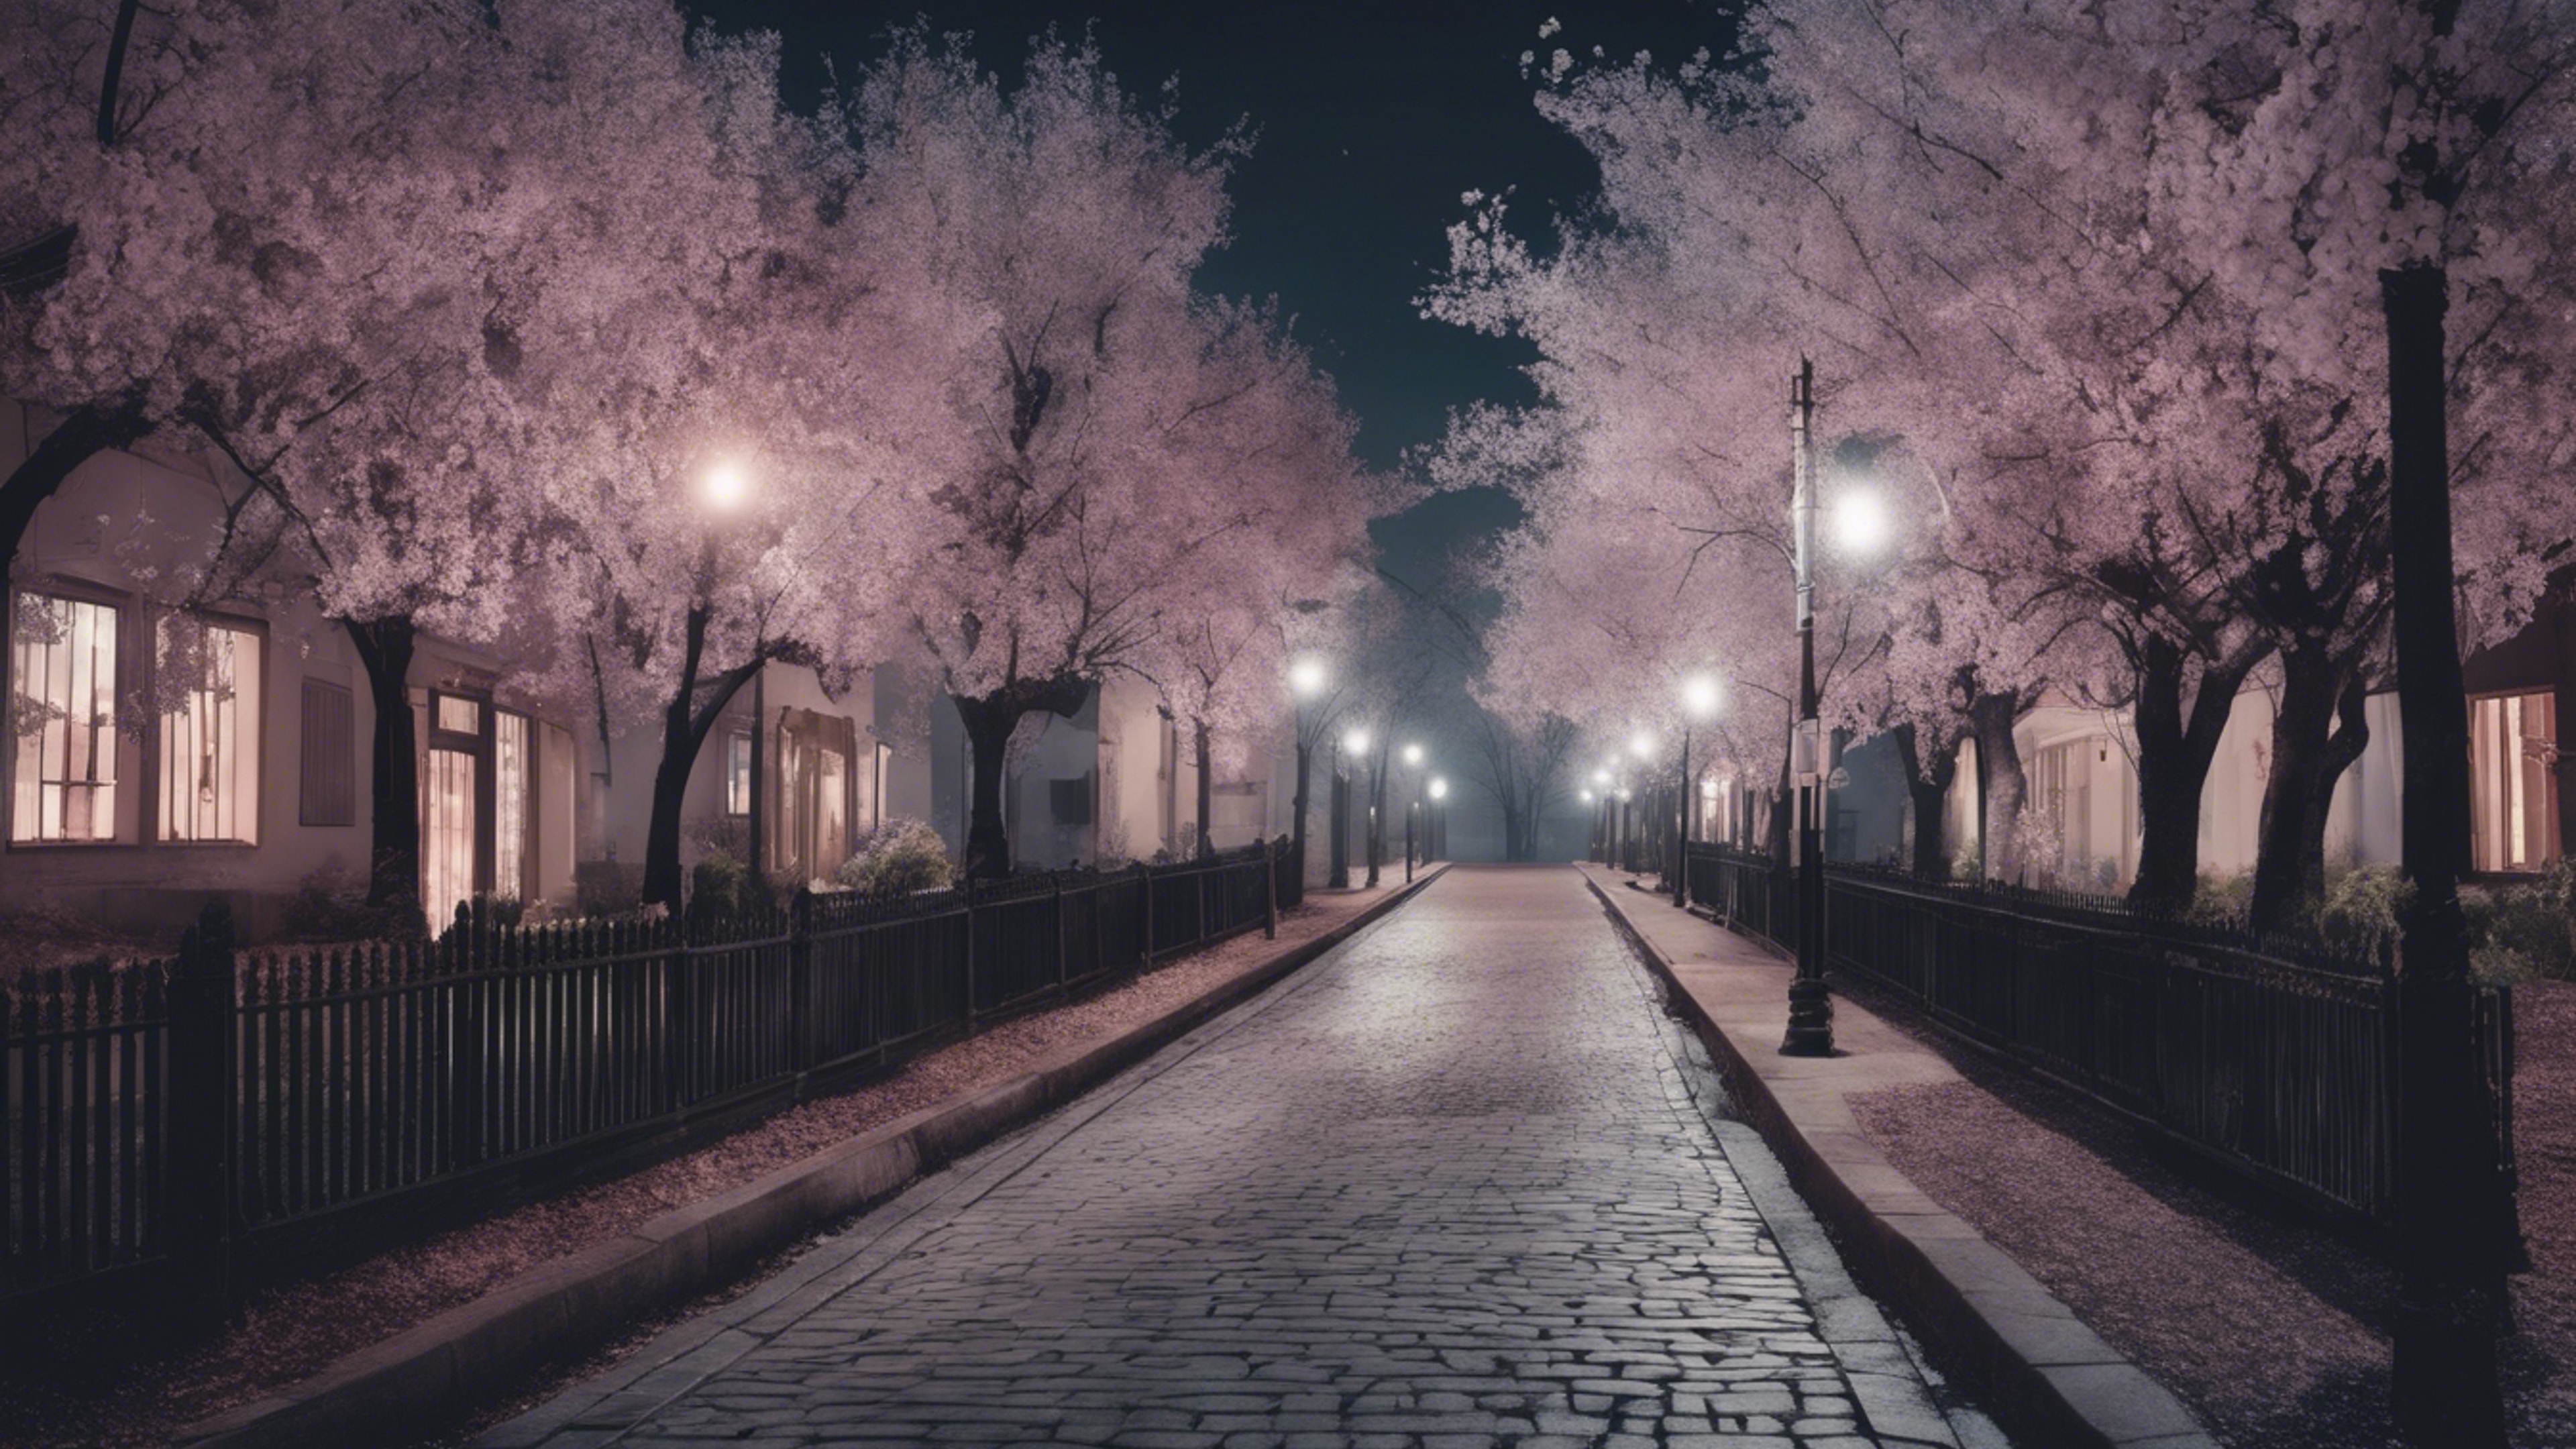 Pastel gothic street lined with black blossom trees under the ghostly night sky. Wallpaper[dc1e1b7f0a0c4838b6b6]